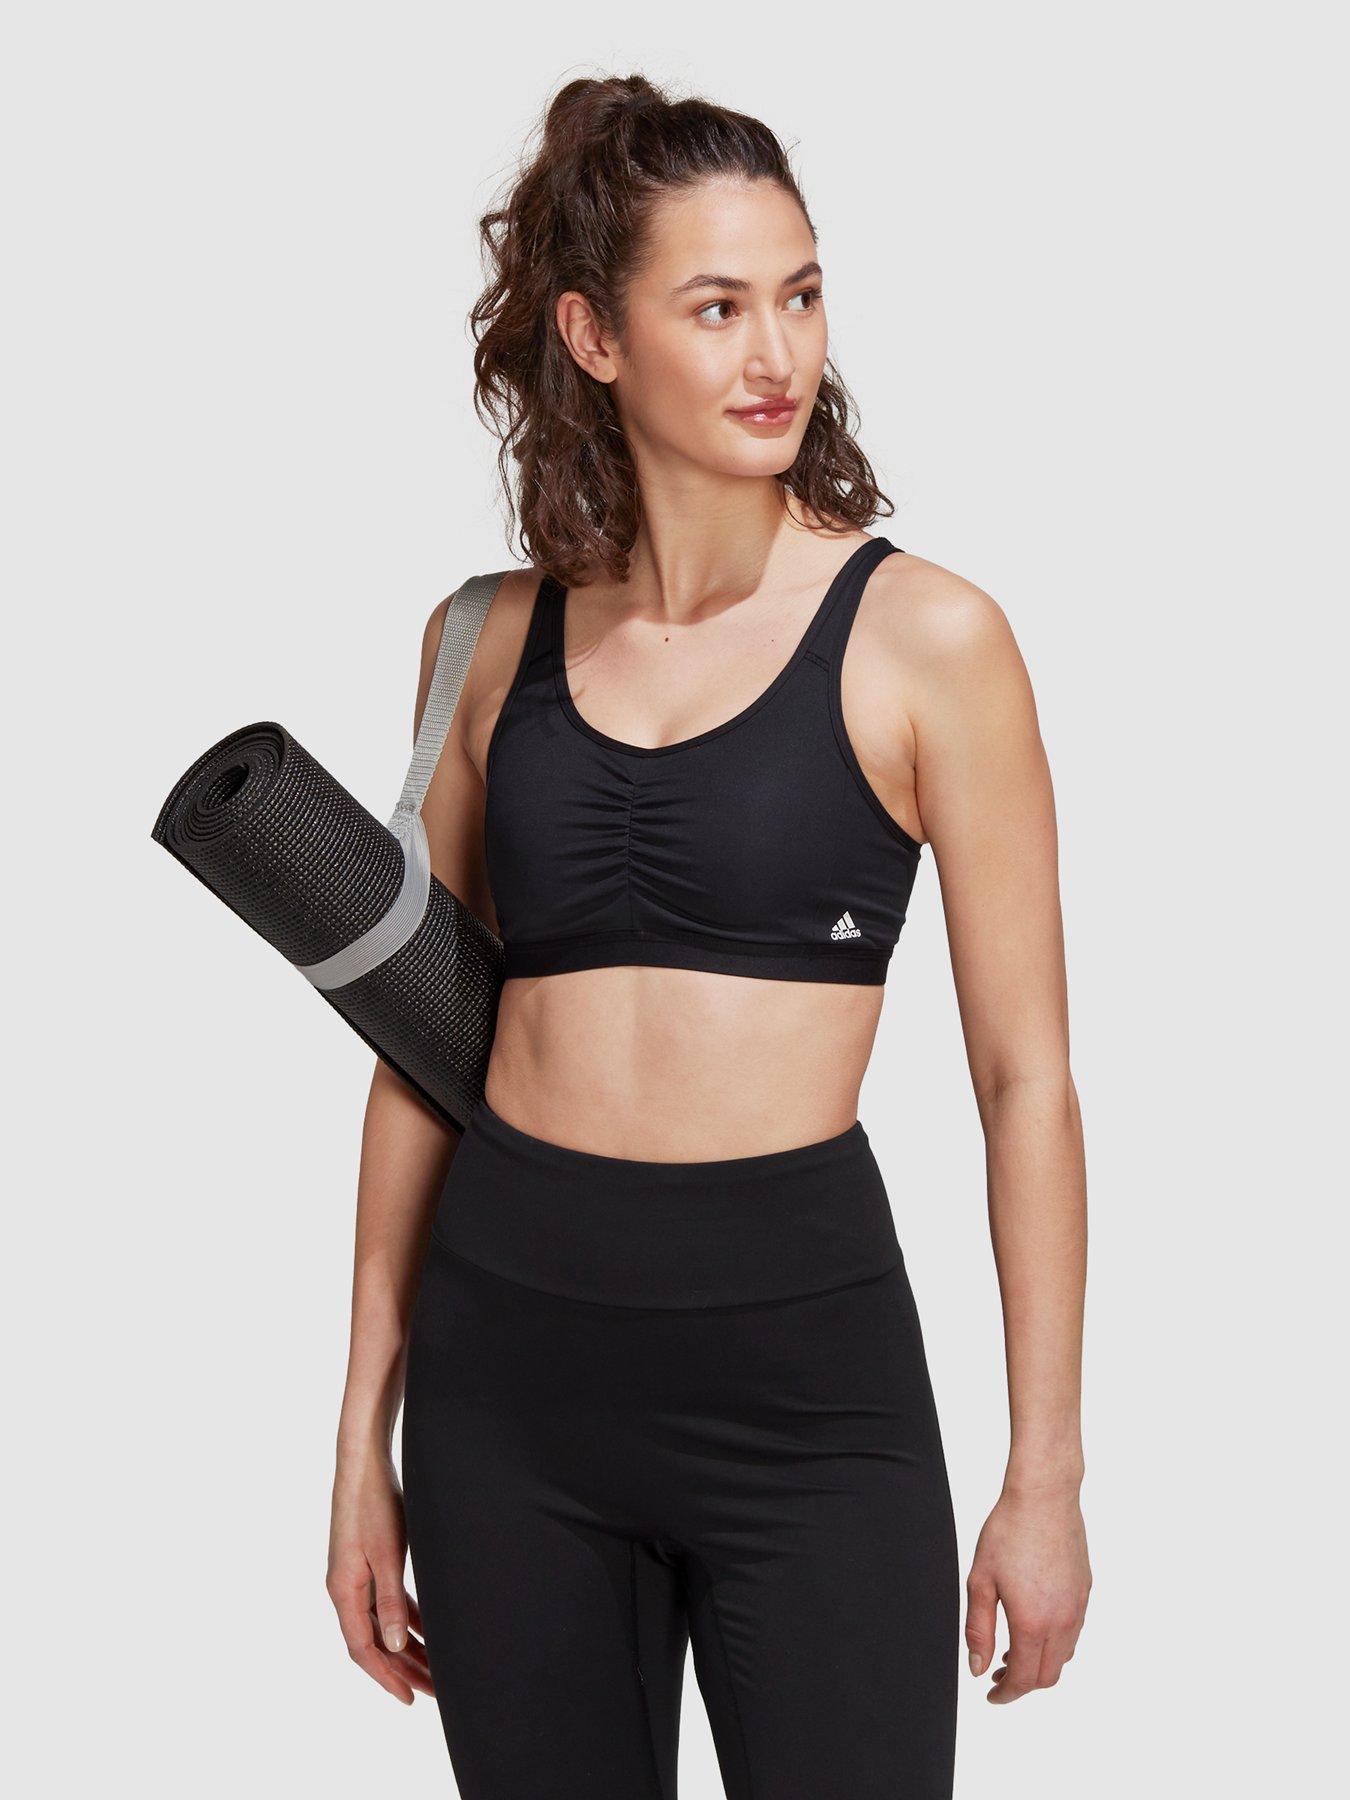 All Black Friday Deals, All Offers, Sports bras